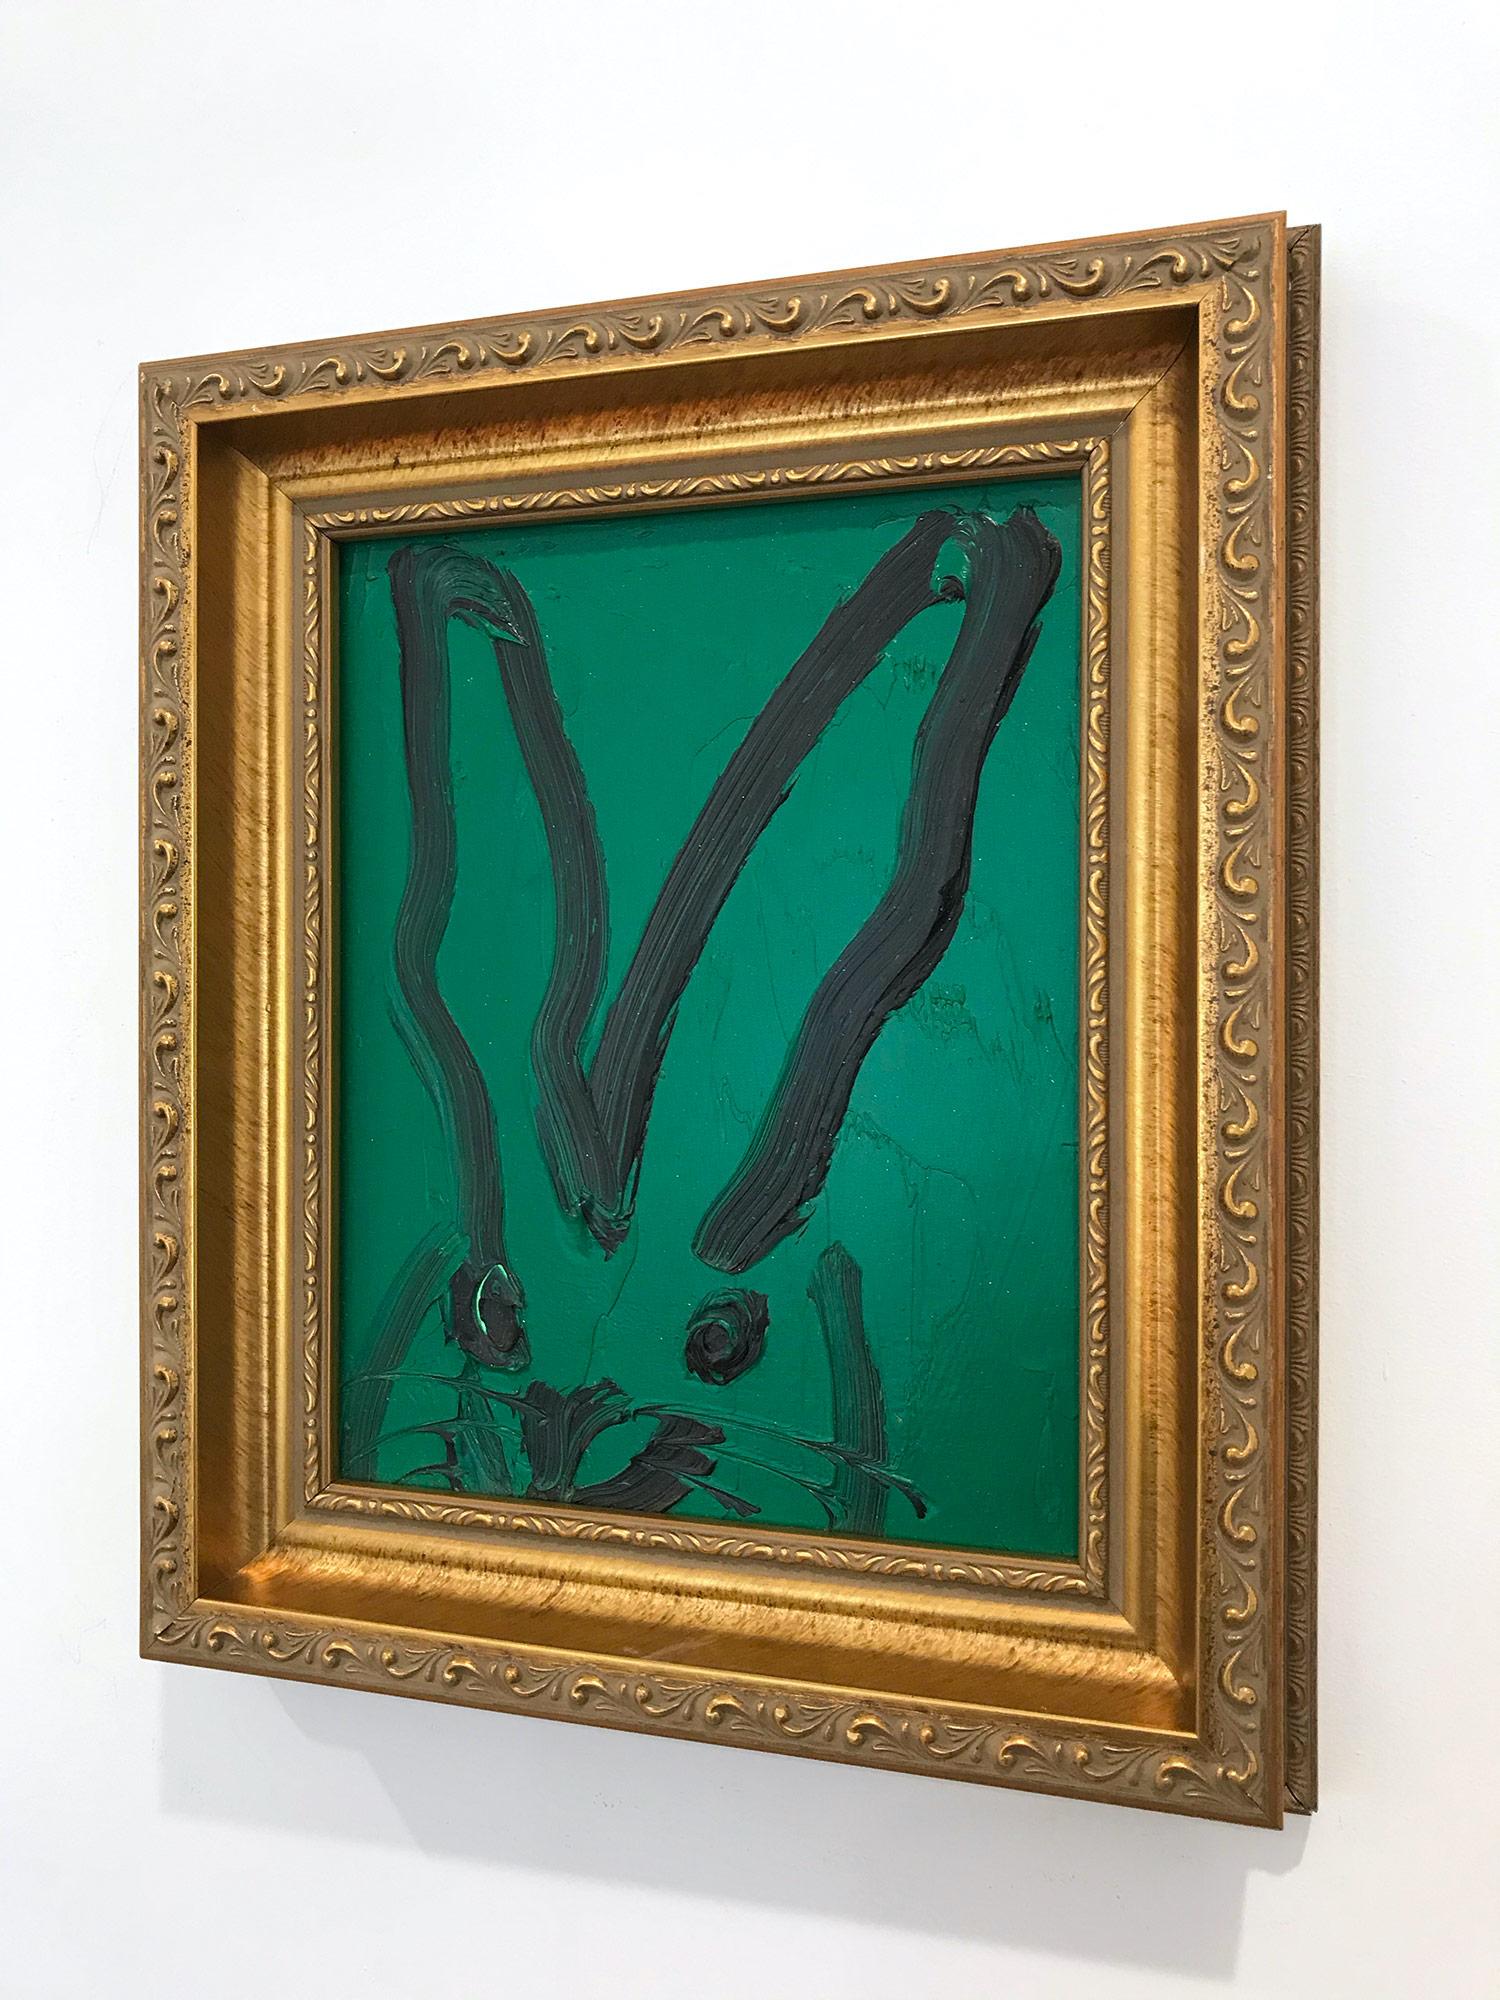 A wonderful composition of one of Slonem's most iconic subjects, Bunnies. This piece depicts a gestural figure of a black bunny on a green background with thick use of paint. Inspired by nature and a genuine love for animals, Slonem's paintings